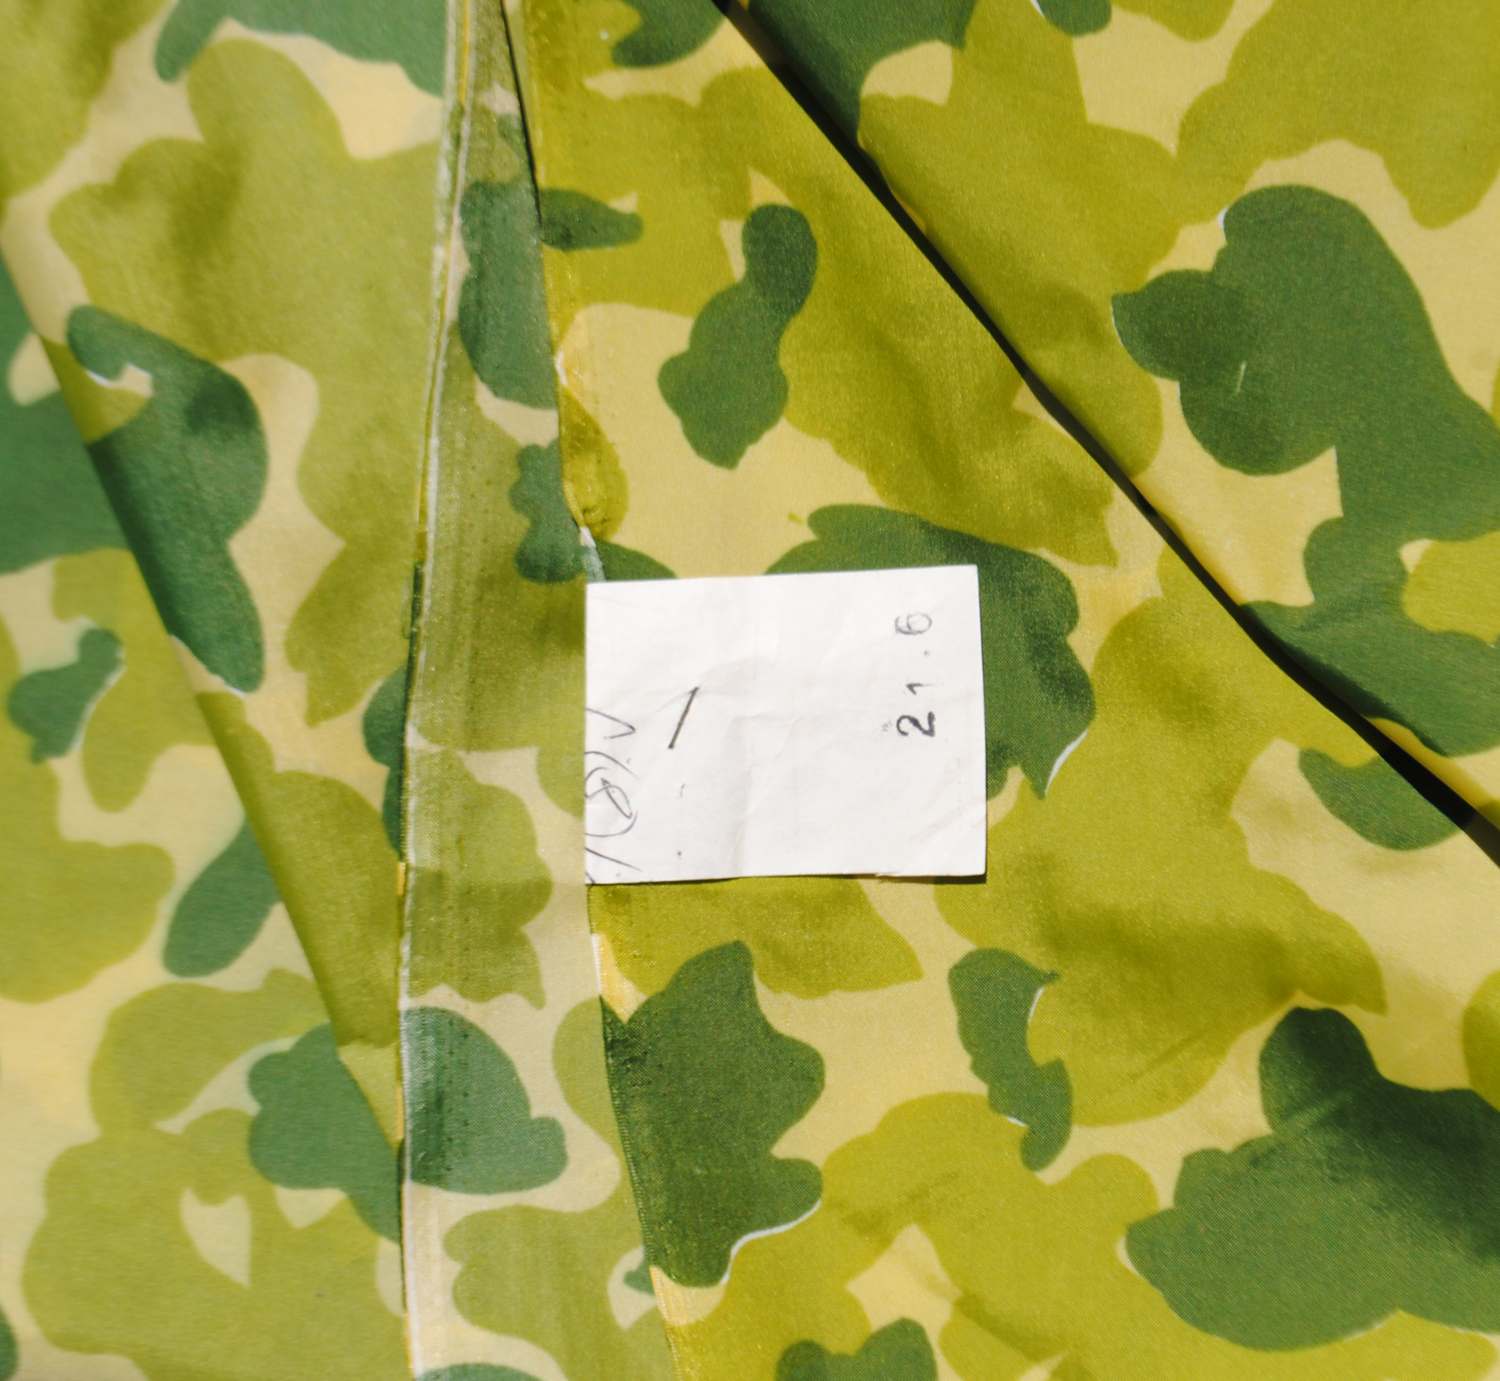 CISO Camouflage Pattern Fabric Swatches - CAMOUFLAGE UNIFORMS - U.S ...